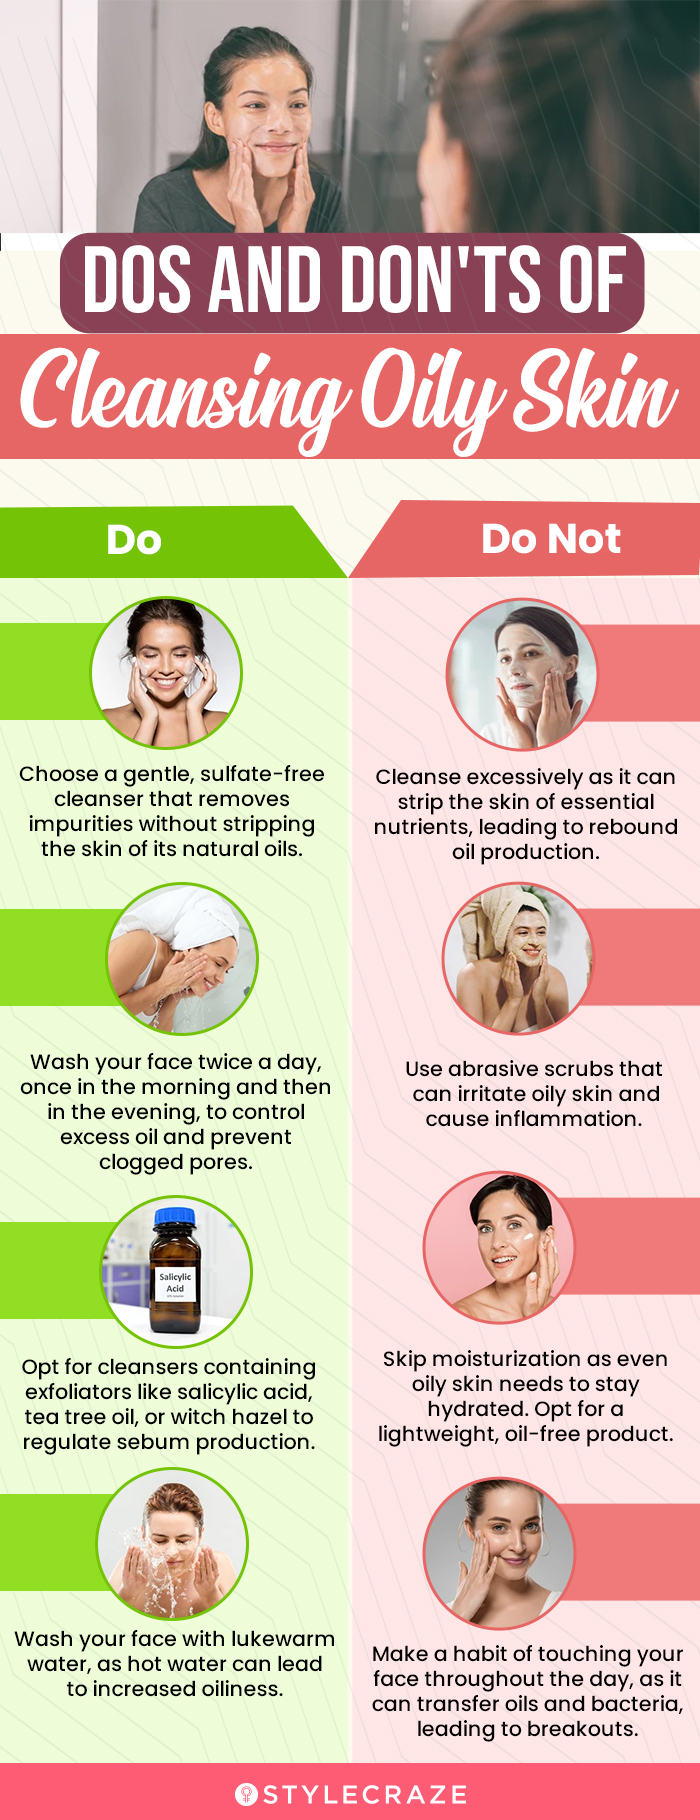 Dos and Don'ts Of Cleansing Oily Skin (infographic)